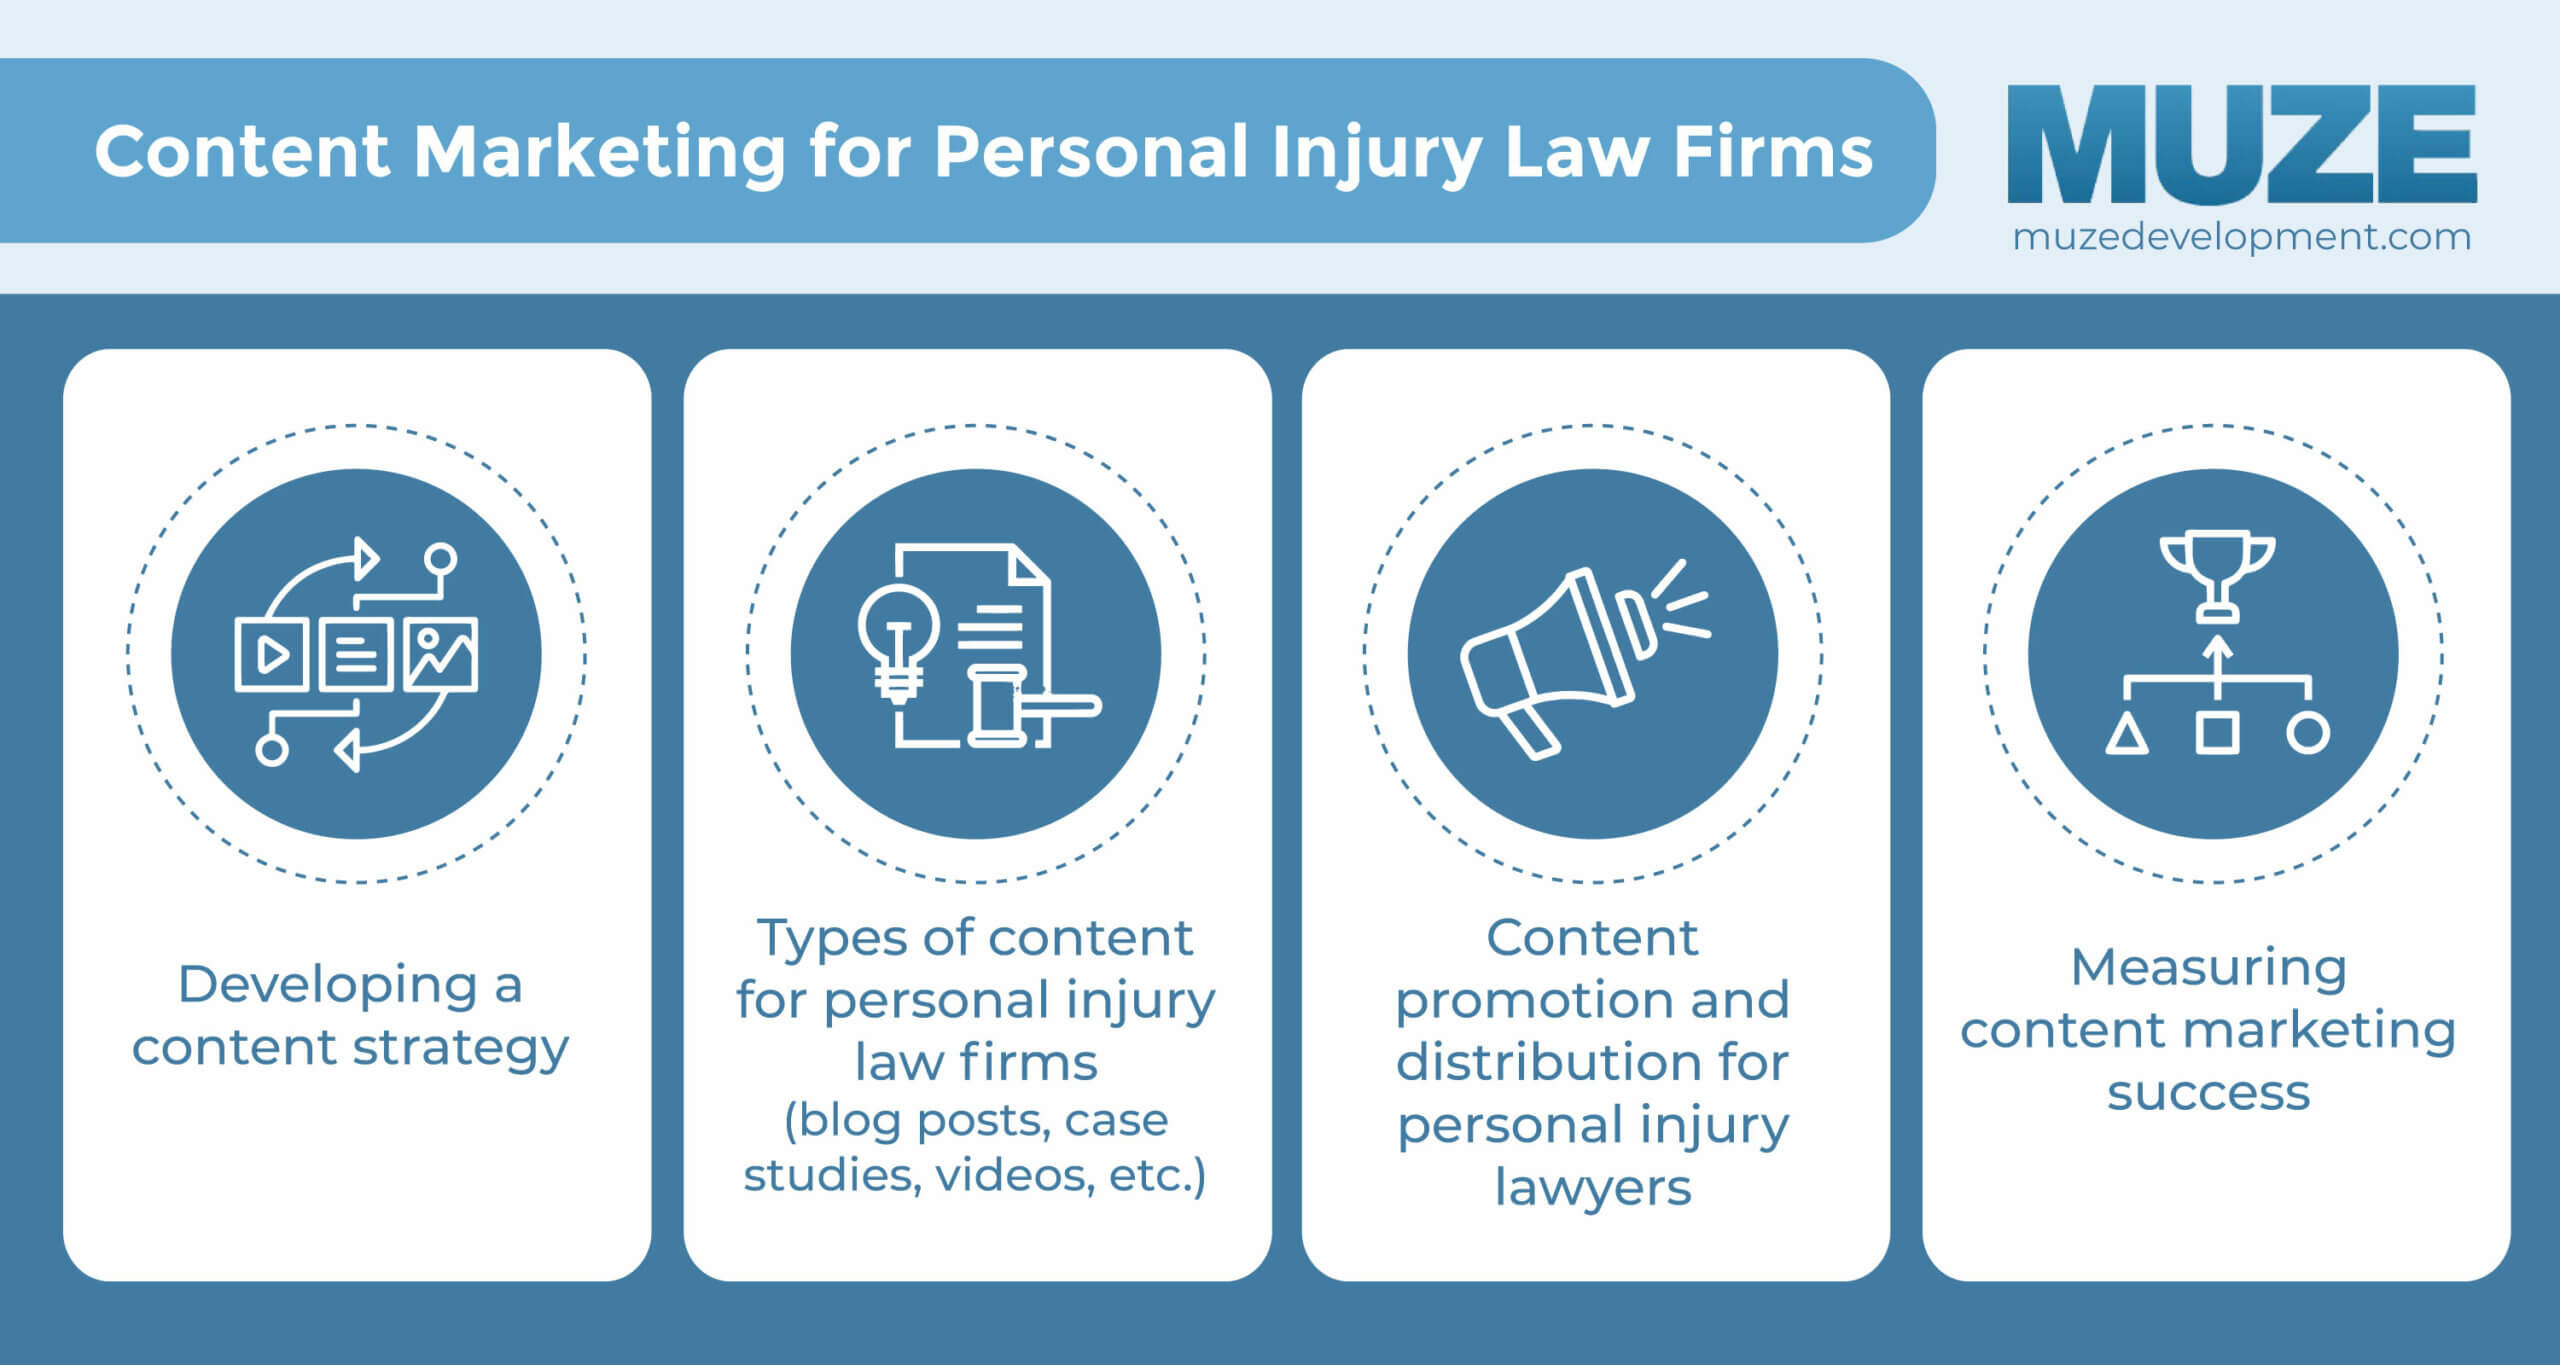 Content Marketing for Personal Injury Law Firms